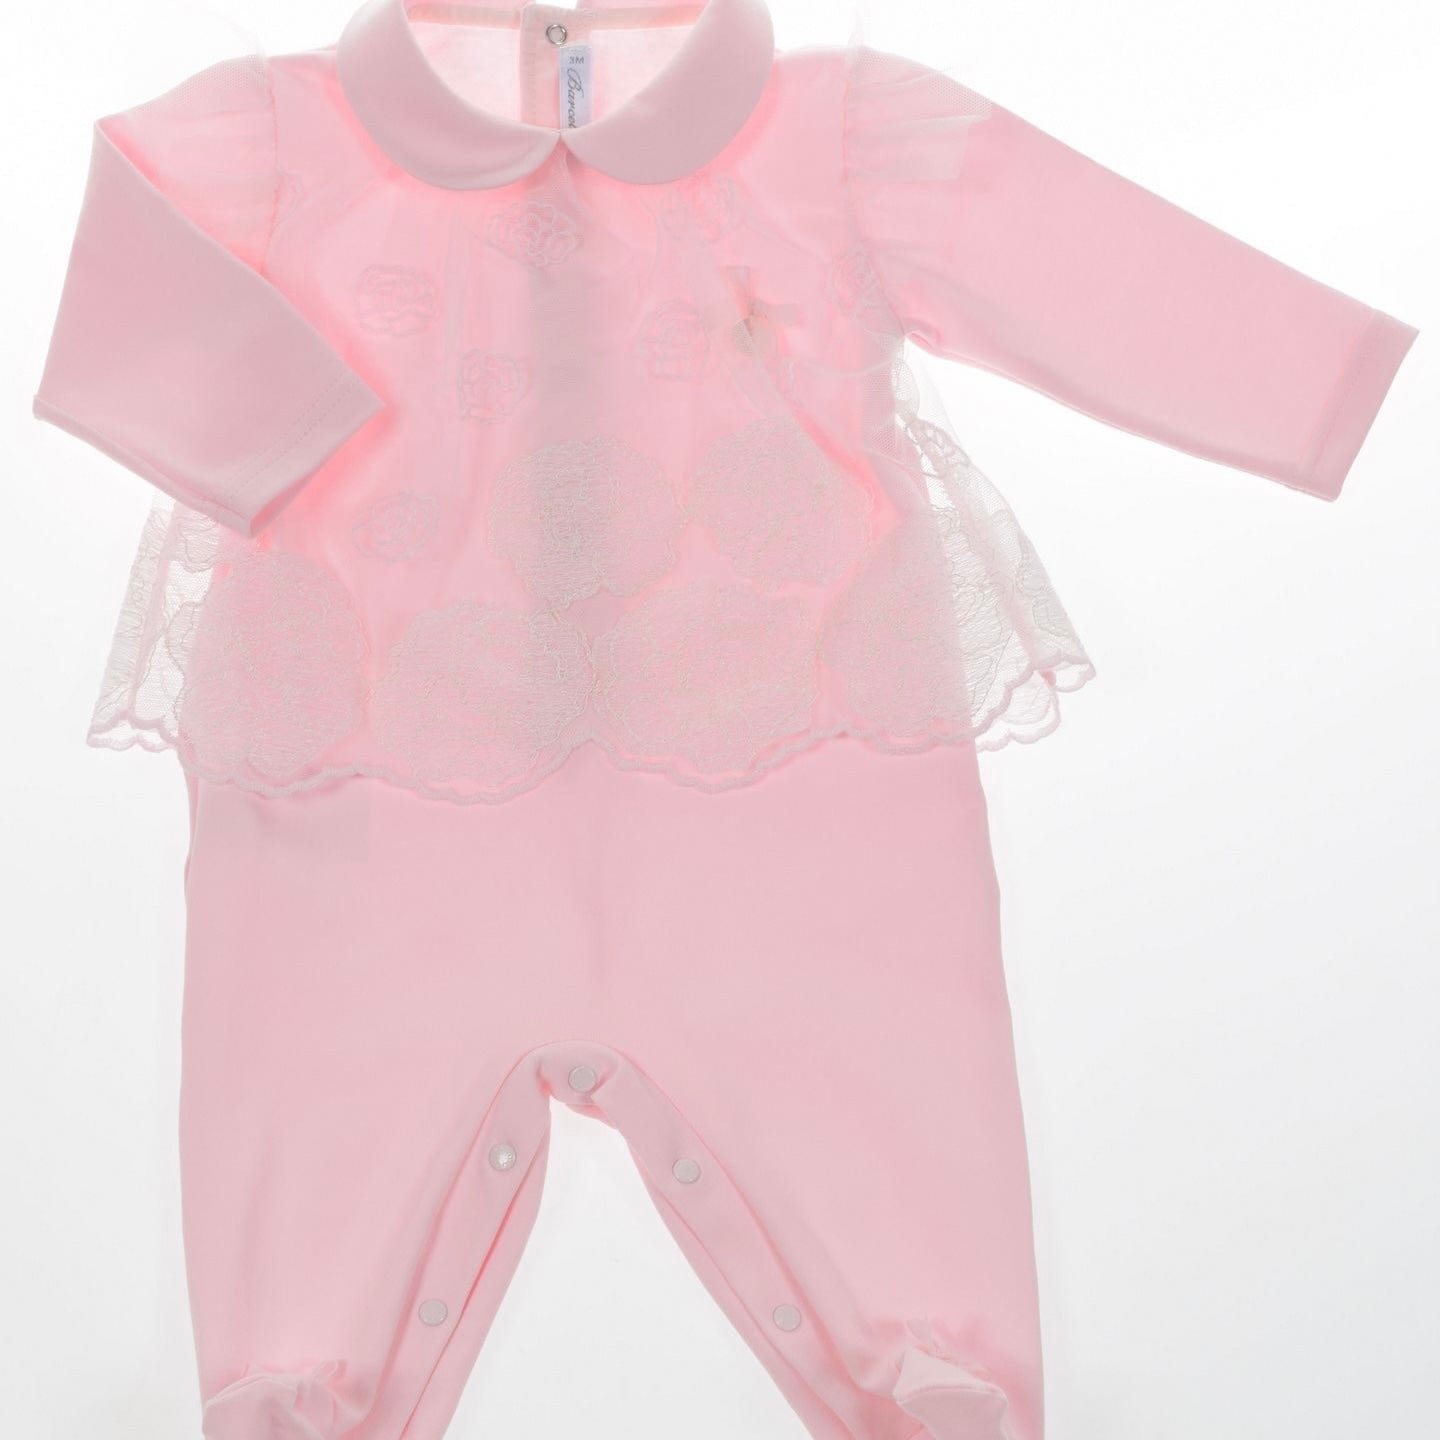 BARCELLINO - Lace Babygrow - Pink